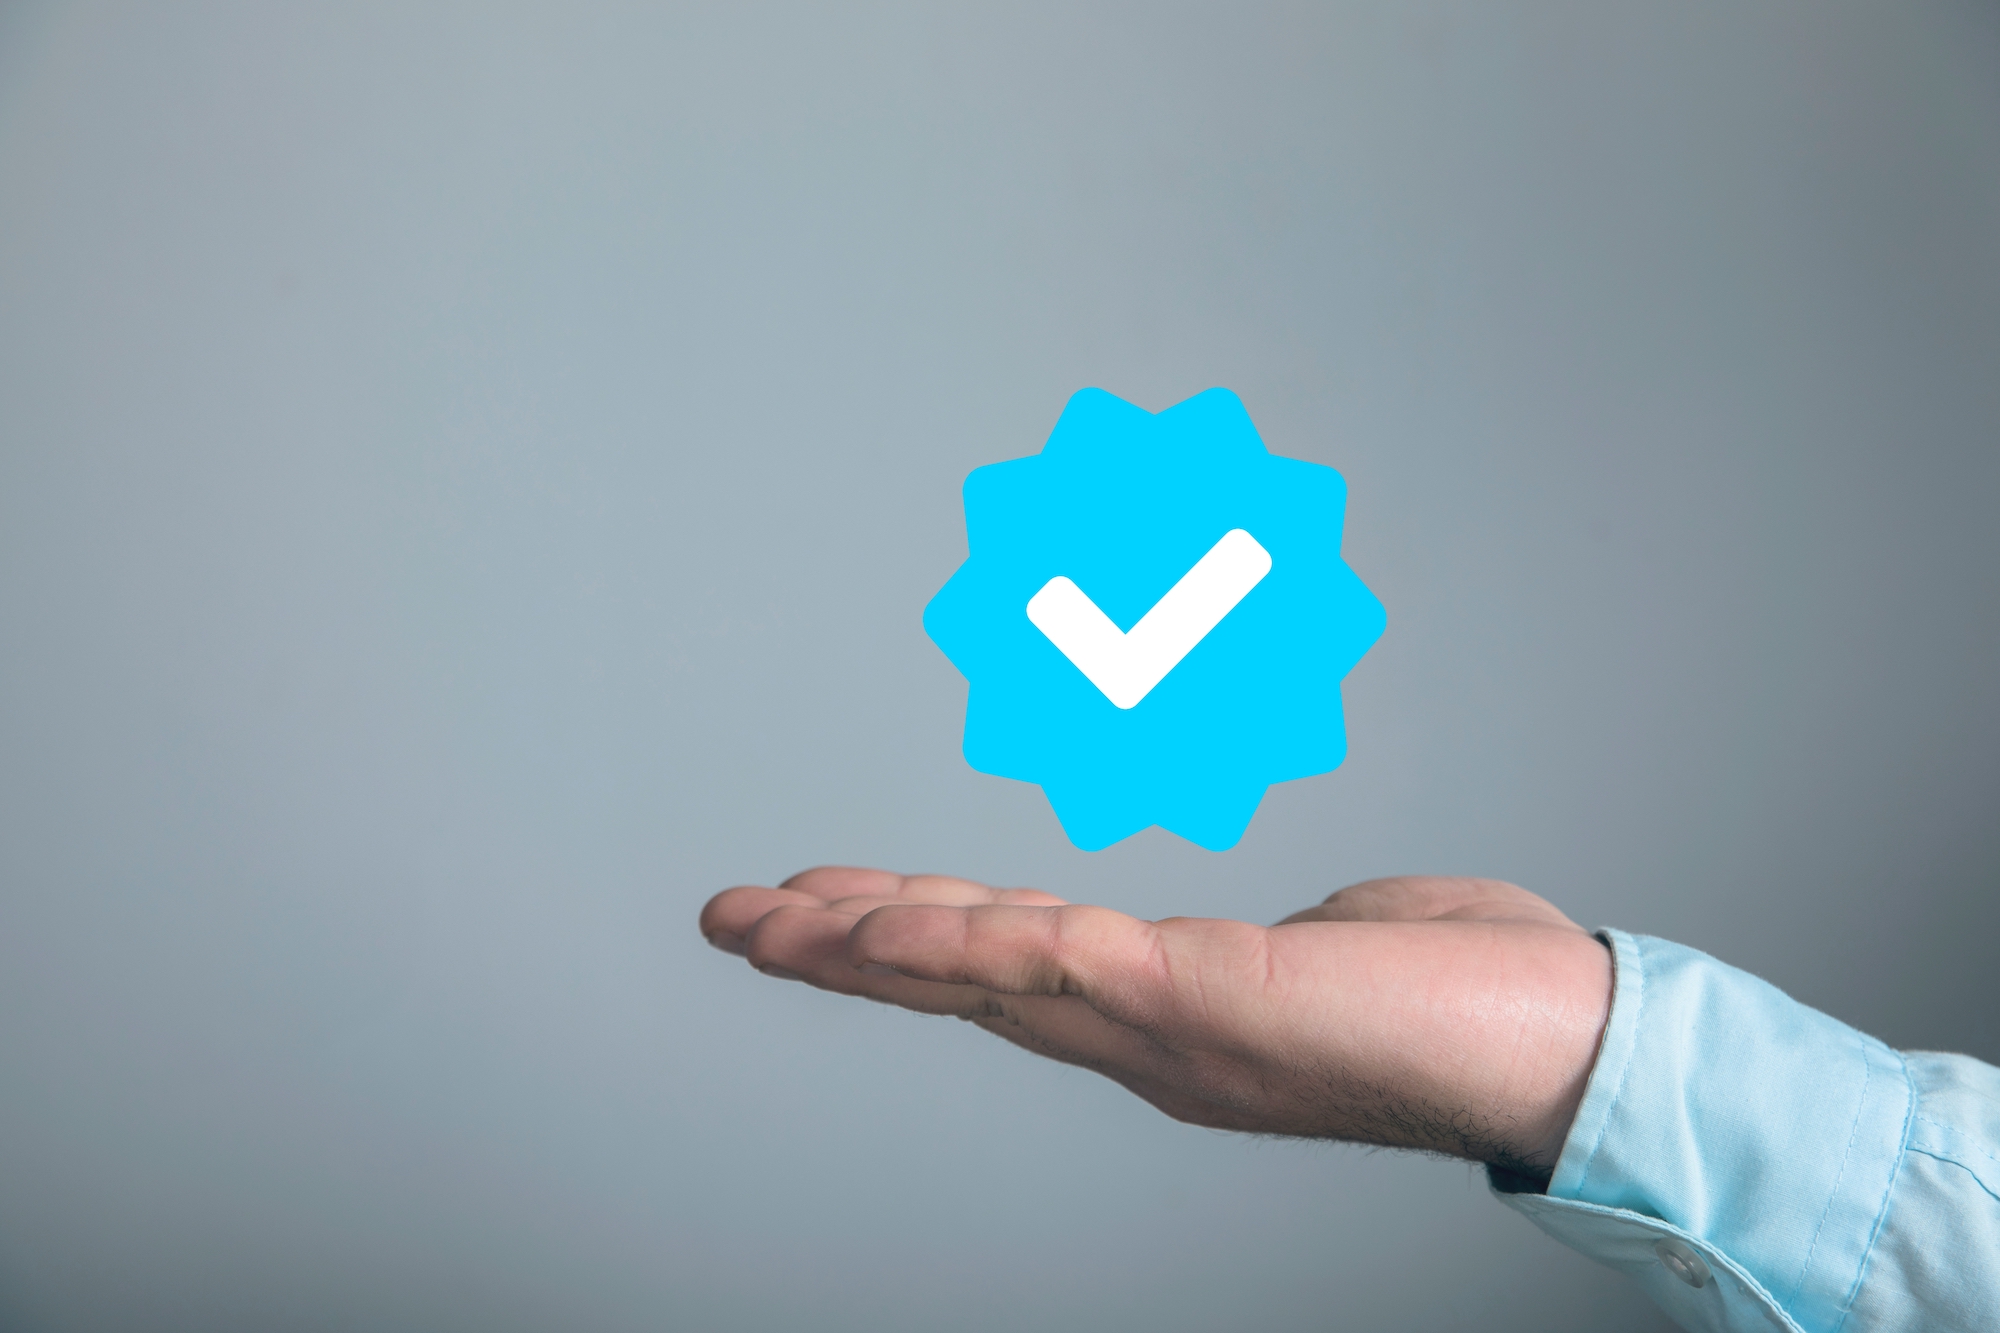 Meta Verified: Facebook, Instagram testing paid service for verified  accounts